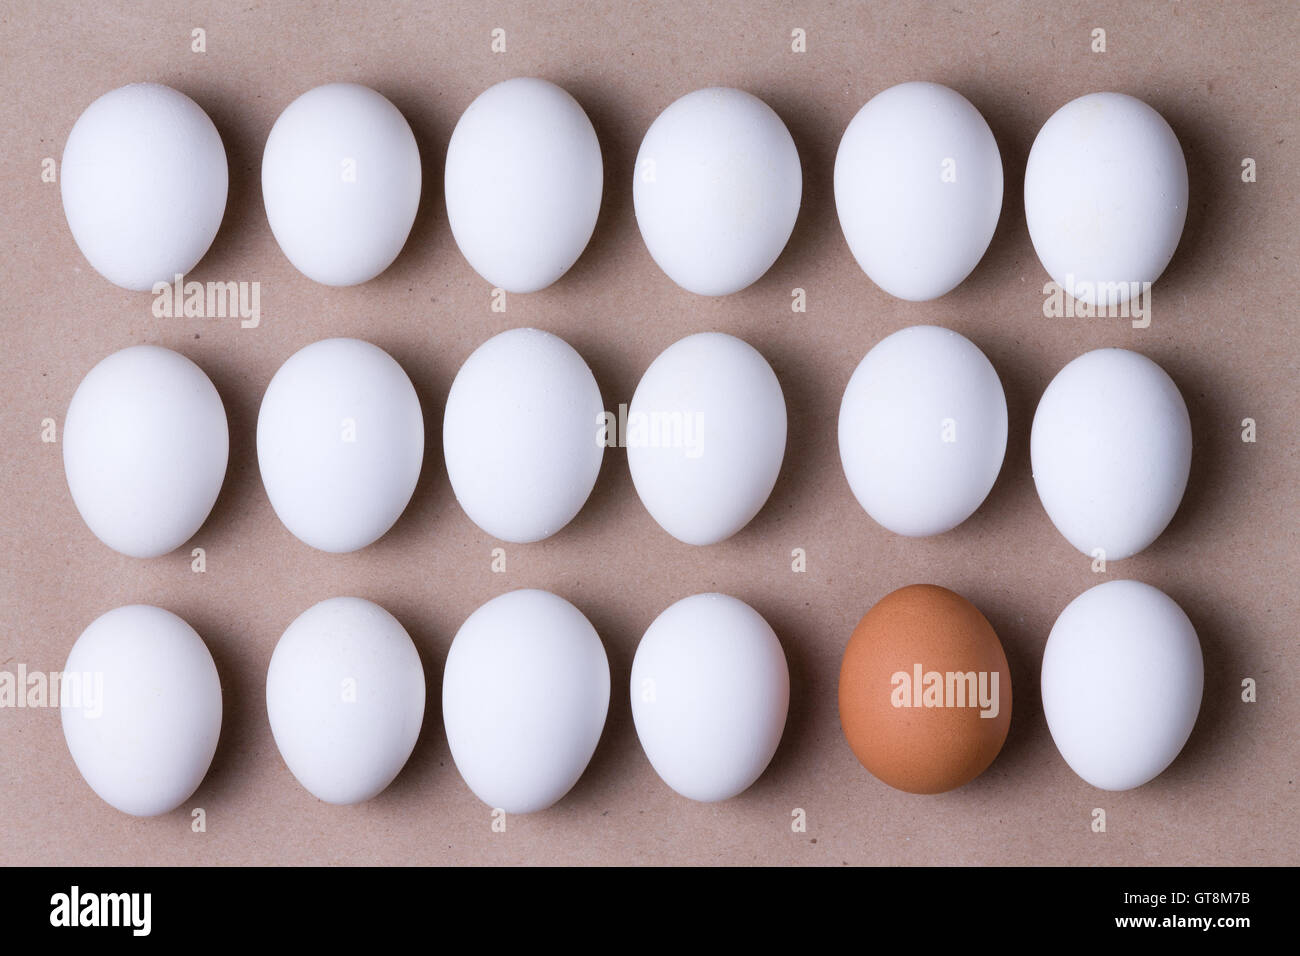 Rows of fresh white farm eggs with one brown one in the bottom row in a concept of individuality and diversity, overhead close u Stock Photo